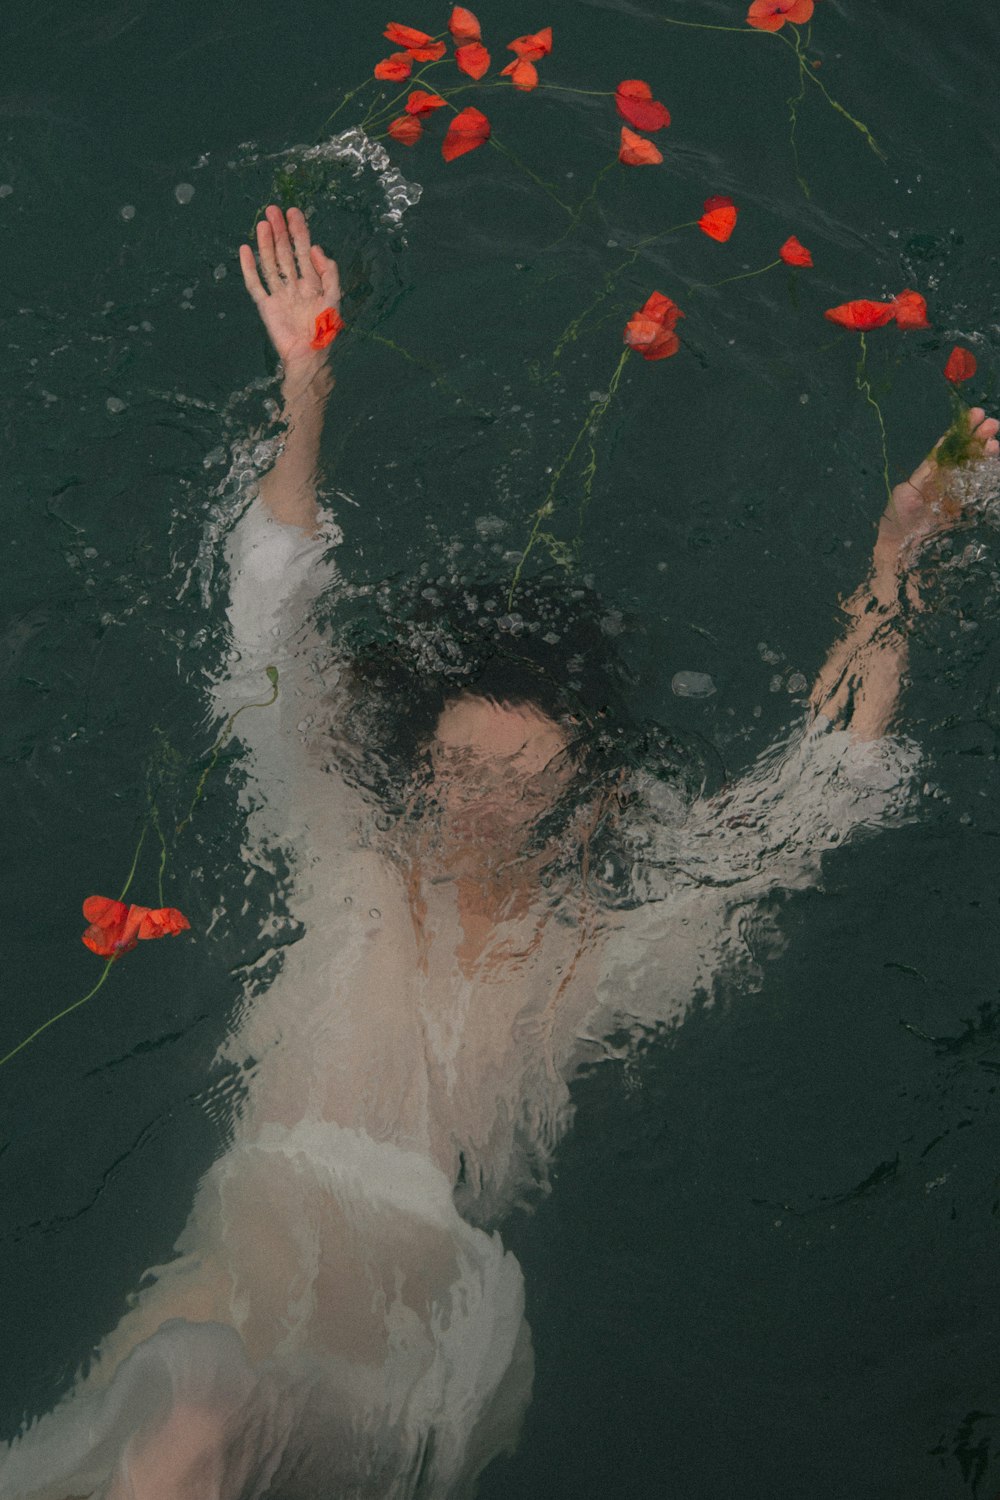 woman in water with red petals